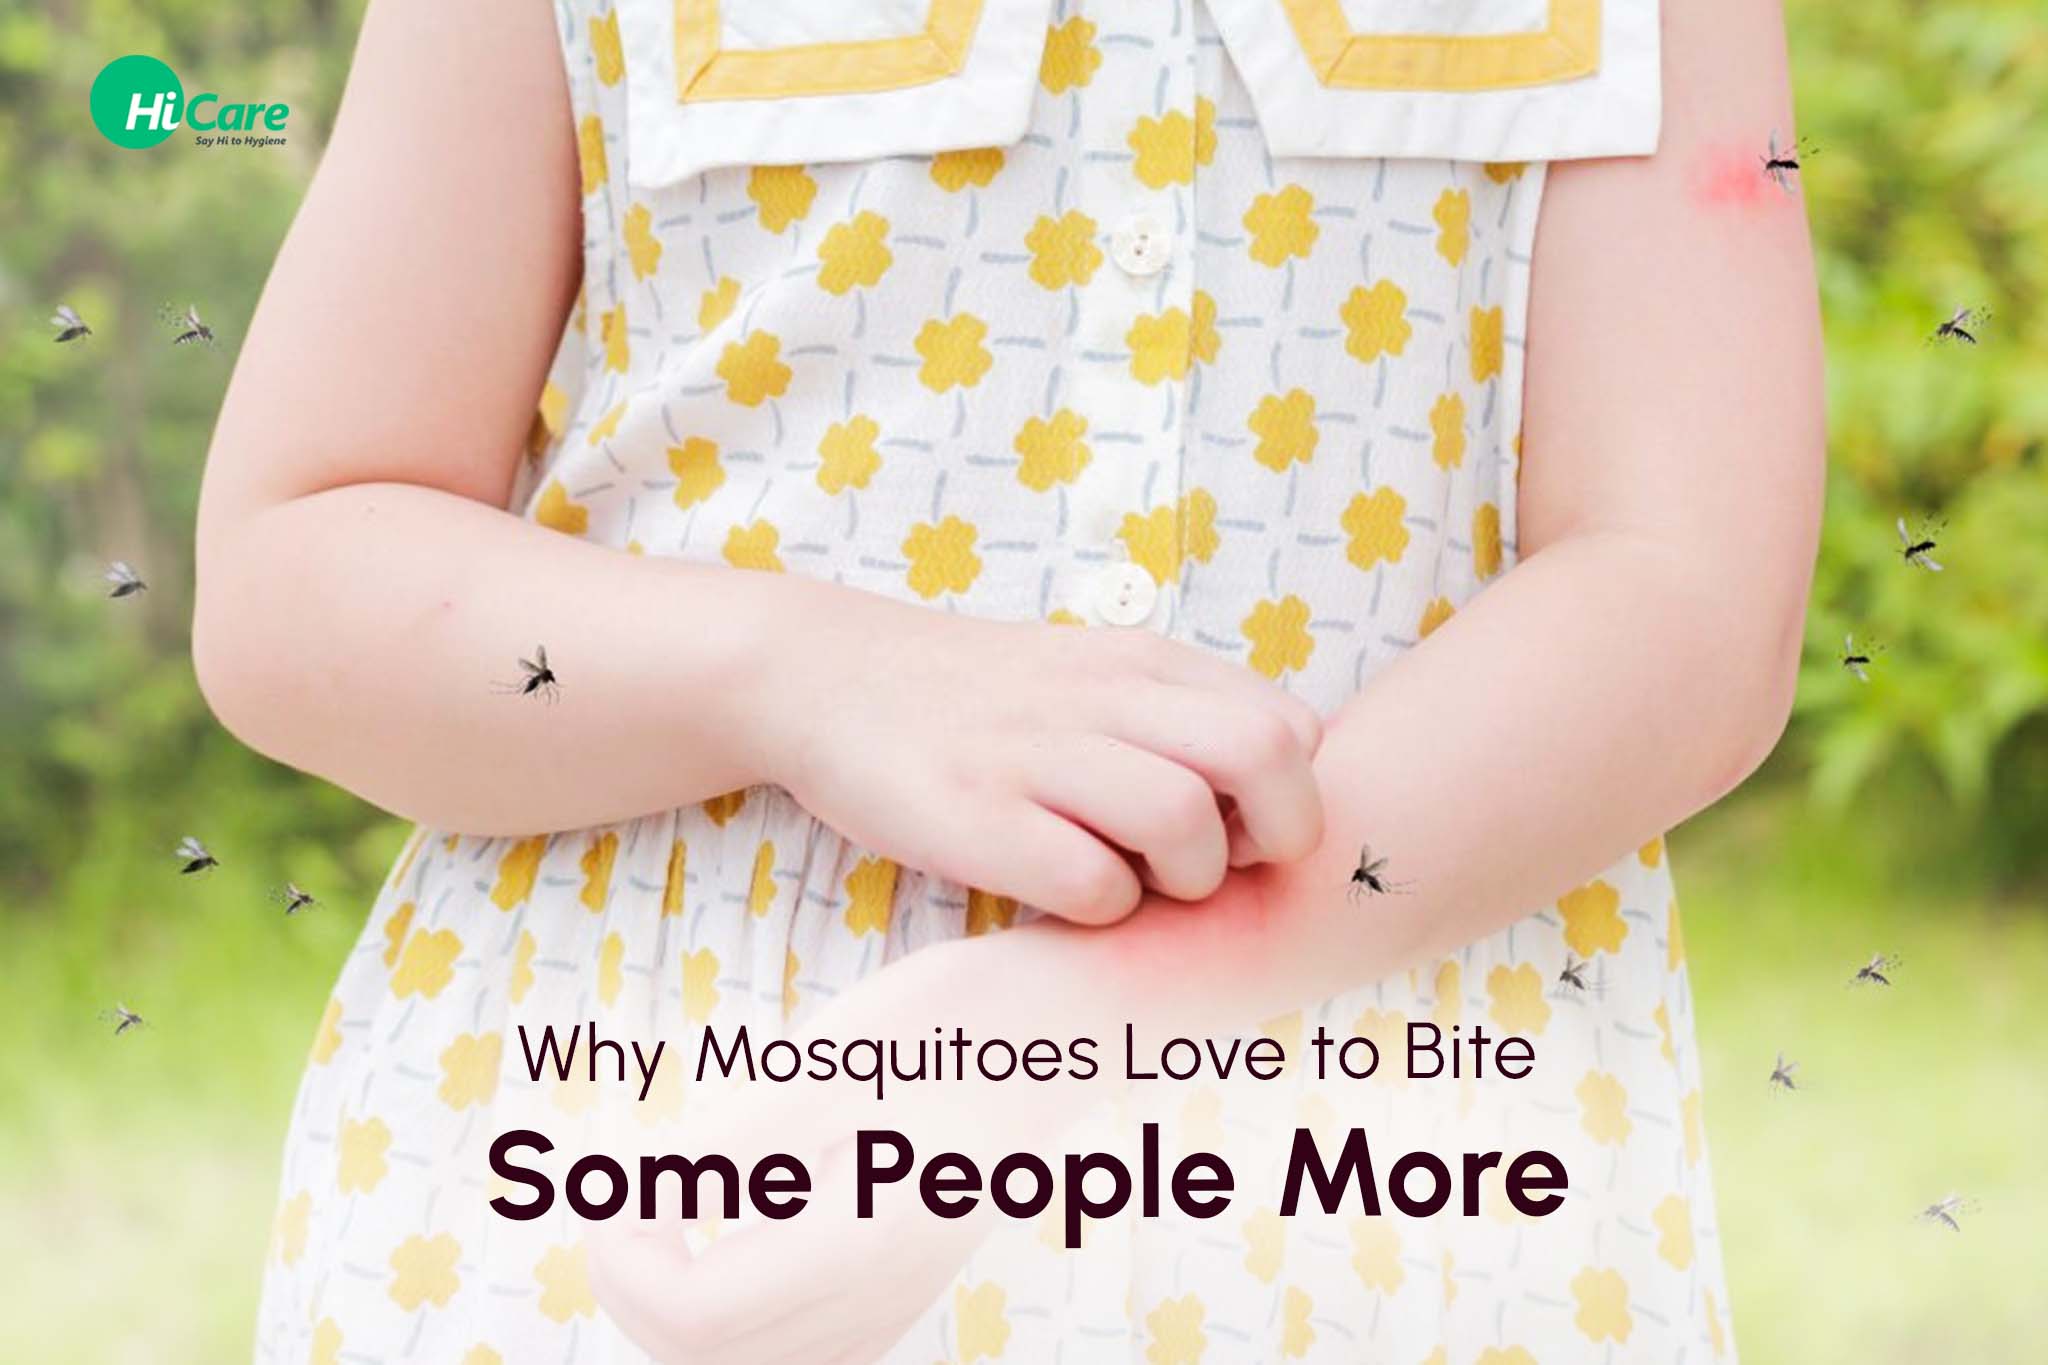 Why Mosquitoes Love to Bite Some People More?